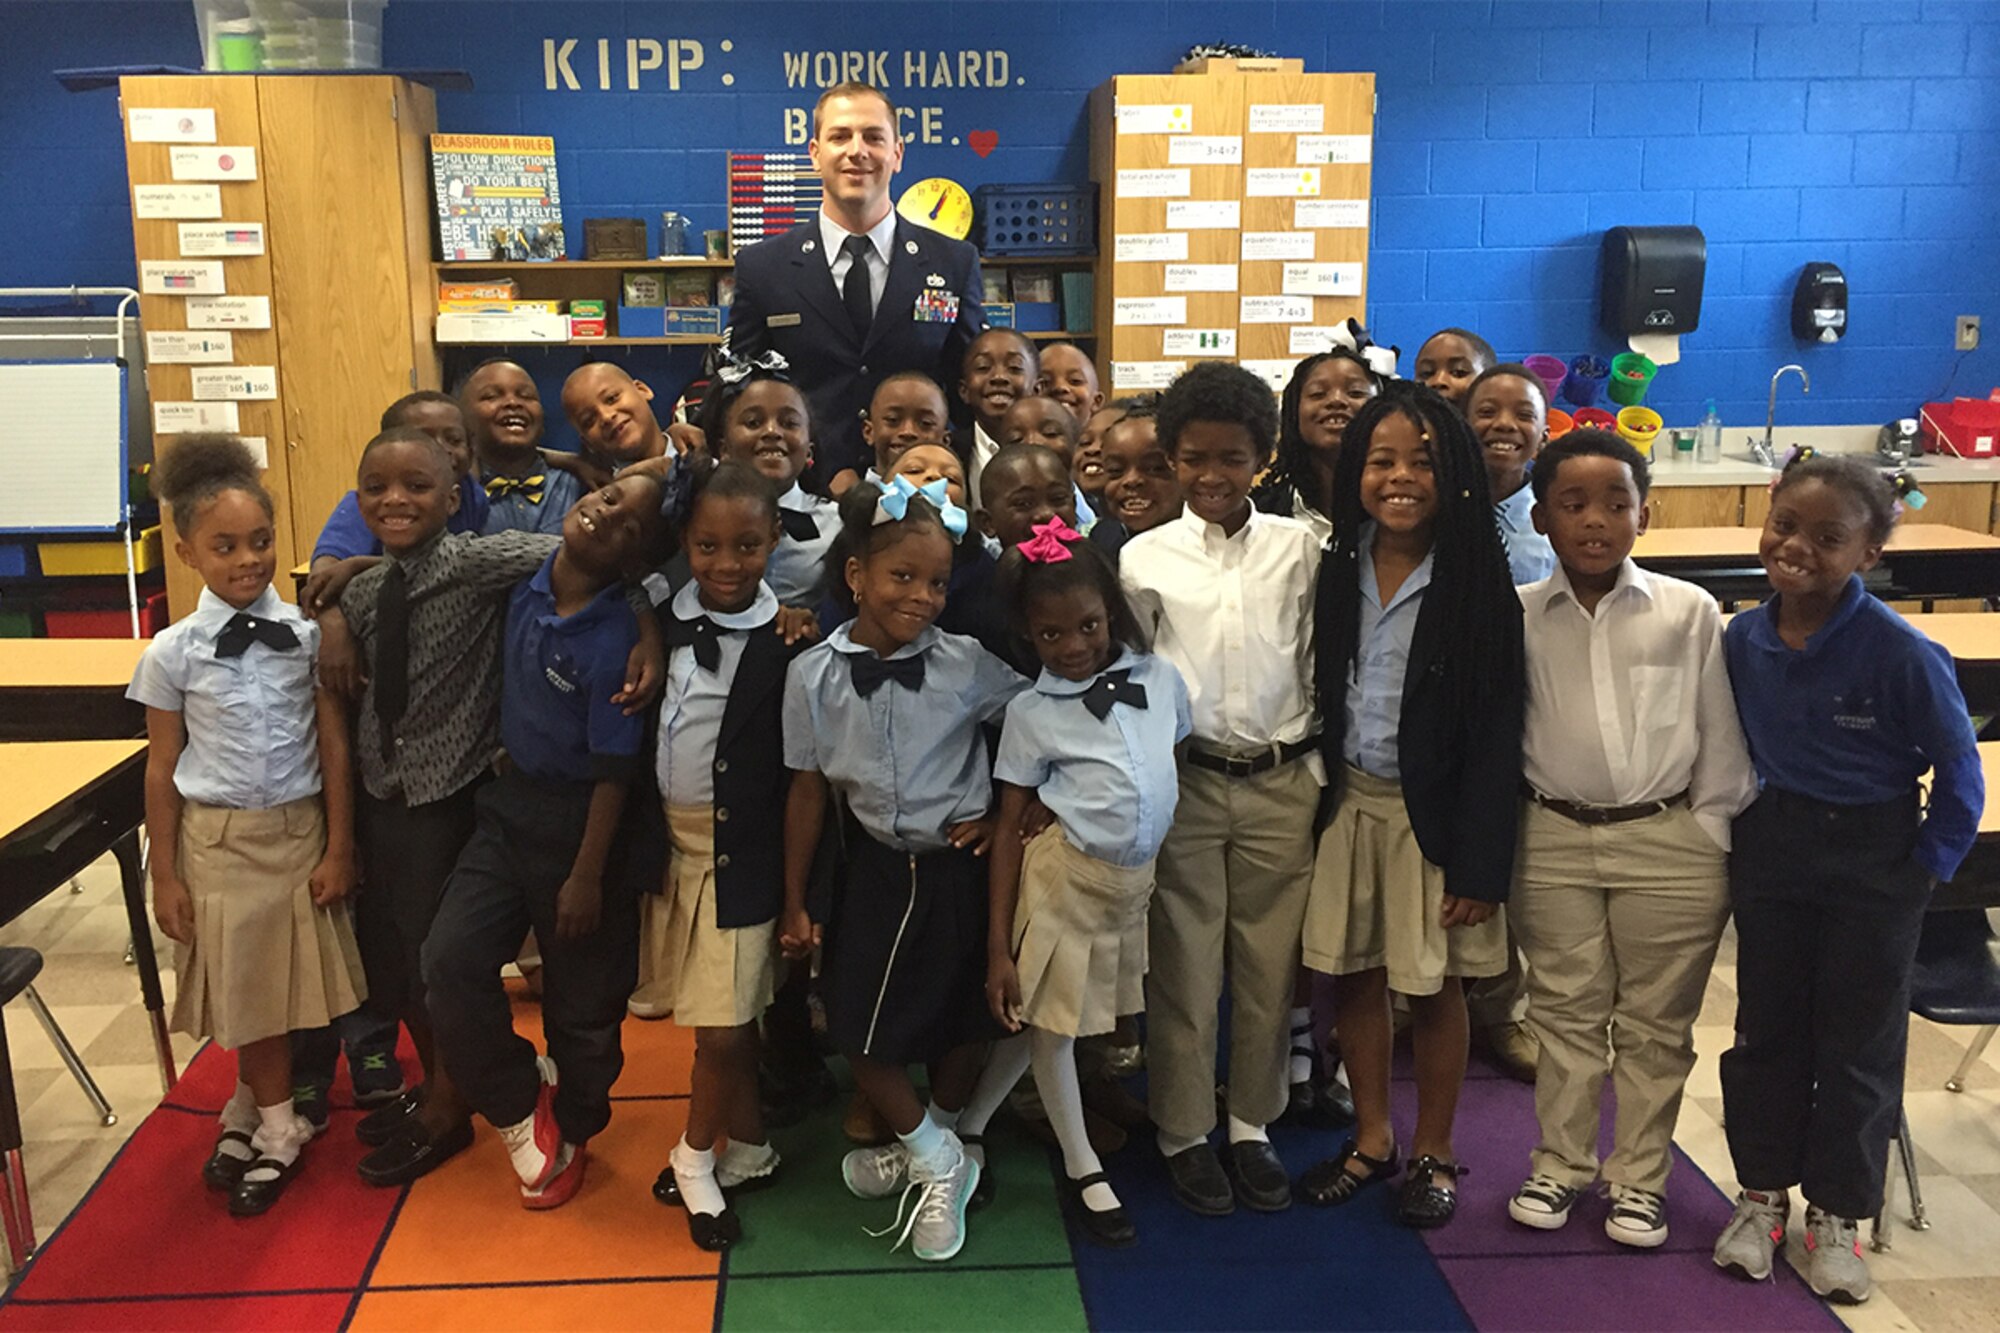 Staff Sgt. Alexander Blench, 80th Aerial Port Squadron air transportation specialist, attends the KIPP WAYS Academy, Atlanta, Georgia, first grade graduation ceremony on May 17, 2016. Blench served as a classroom volunteer tutoring students in grammar and math while transitioning from active duty into the Air Force Reserve. KIPP WAYS Academy is a free, public charter school that grants admission to students in the Atlanta Public Schools District, regardless of their prior academic records, conduct or social-economic background. (Courtesy photo)